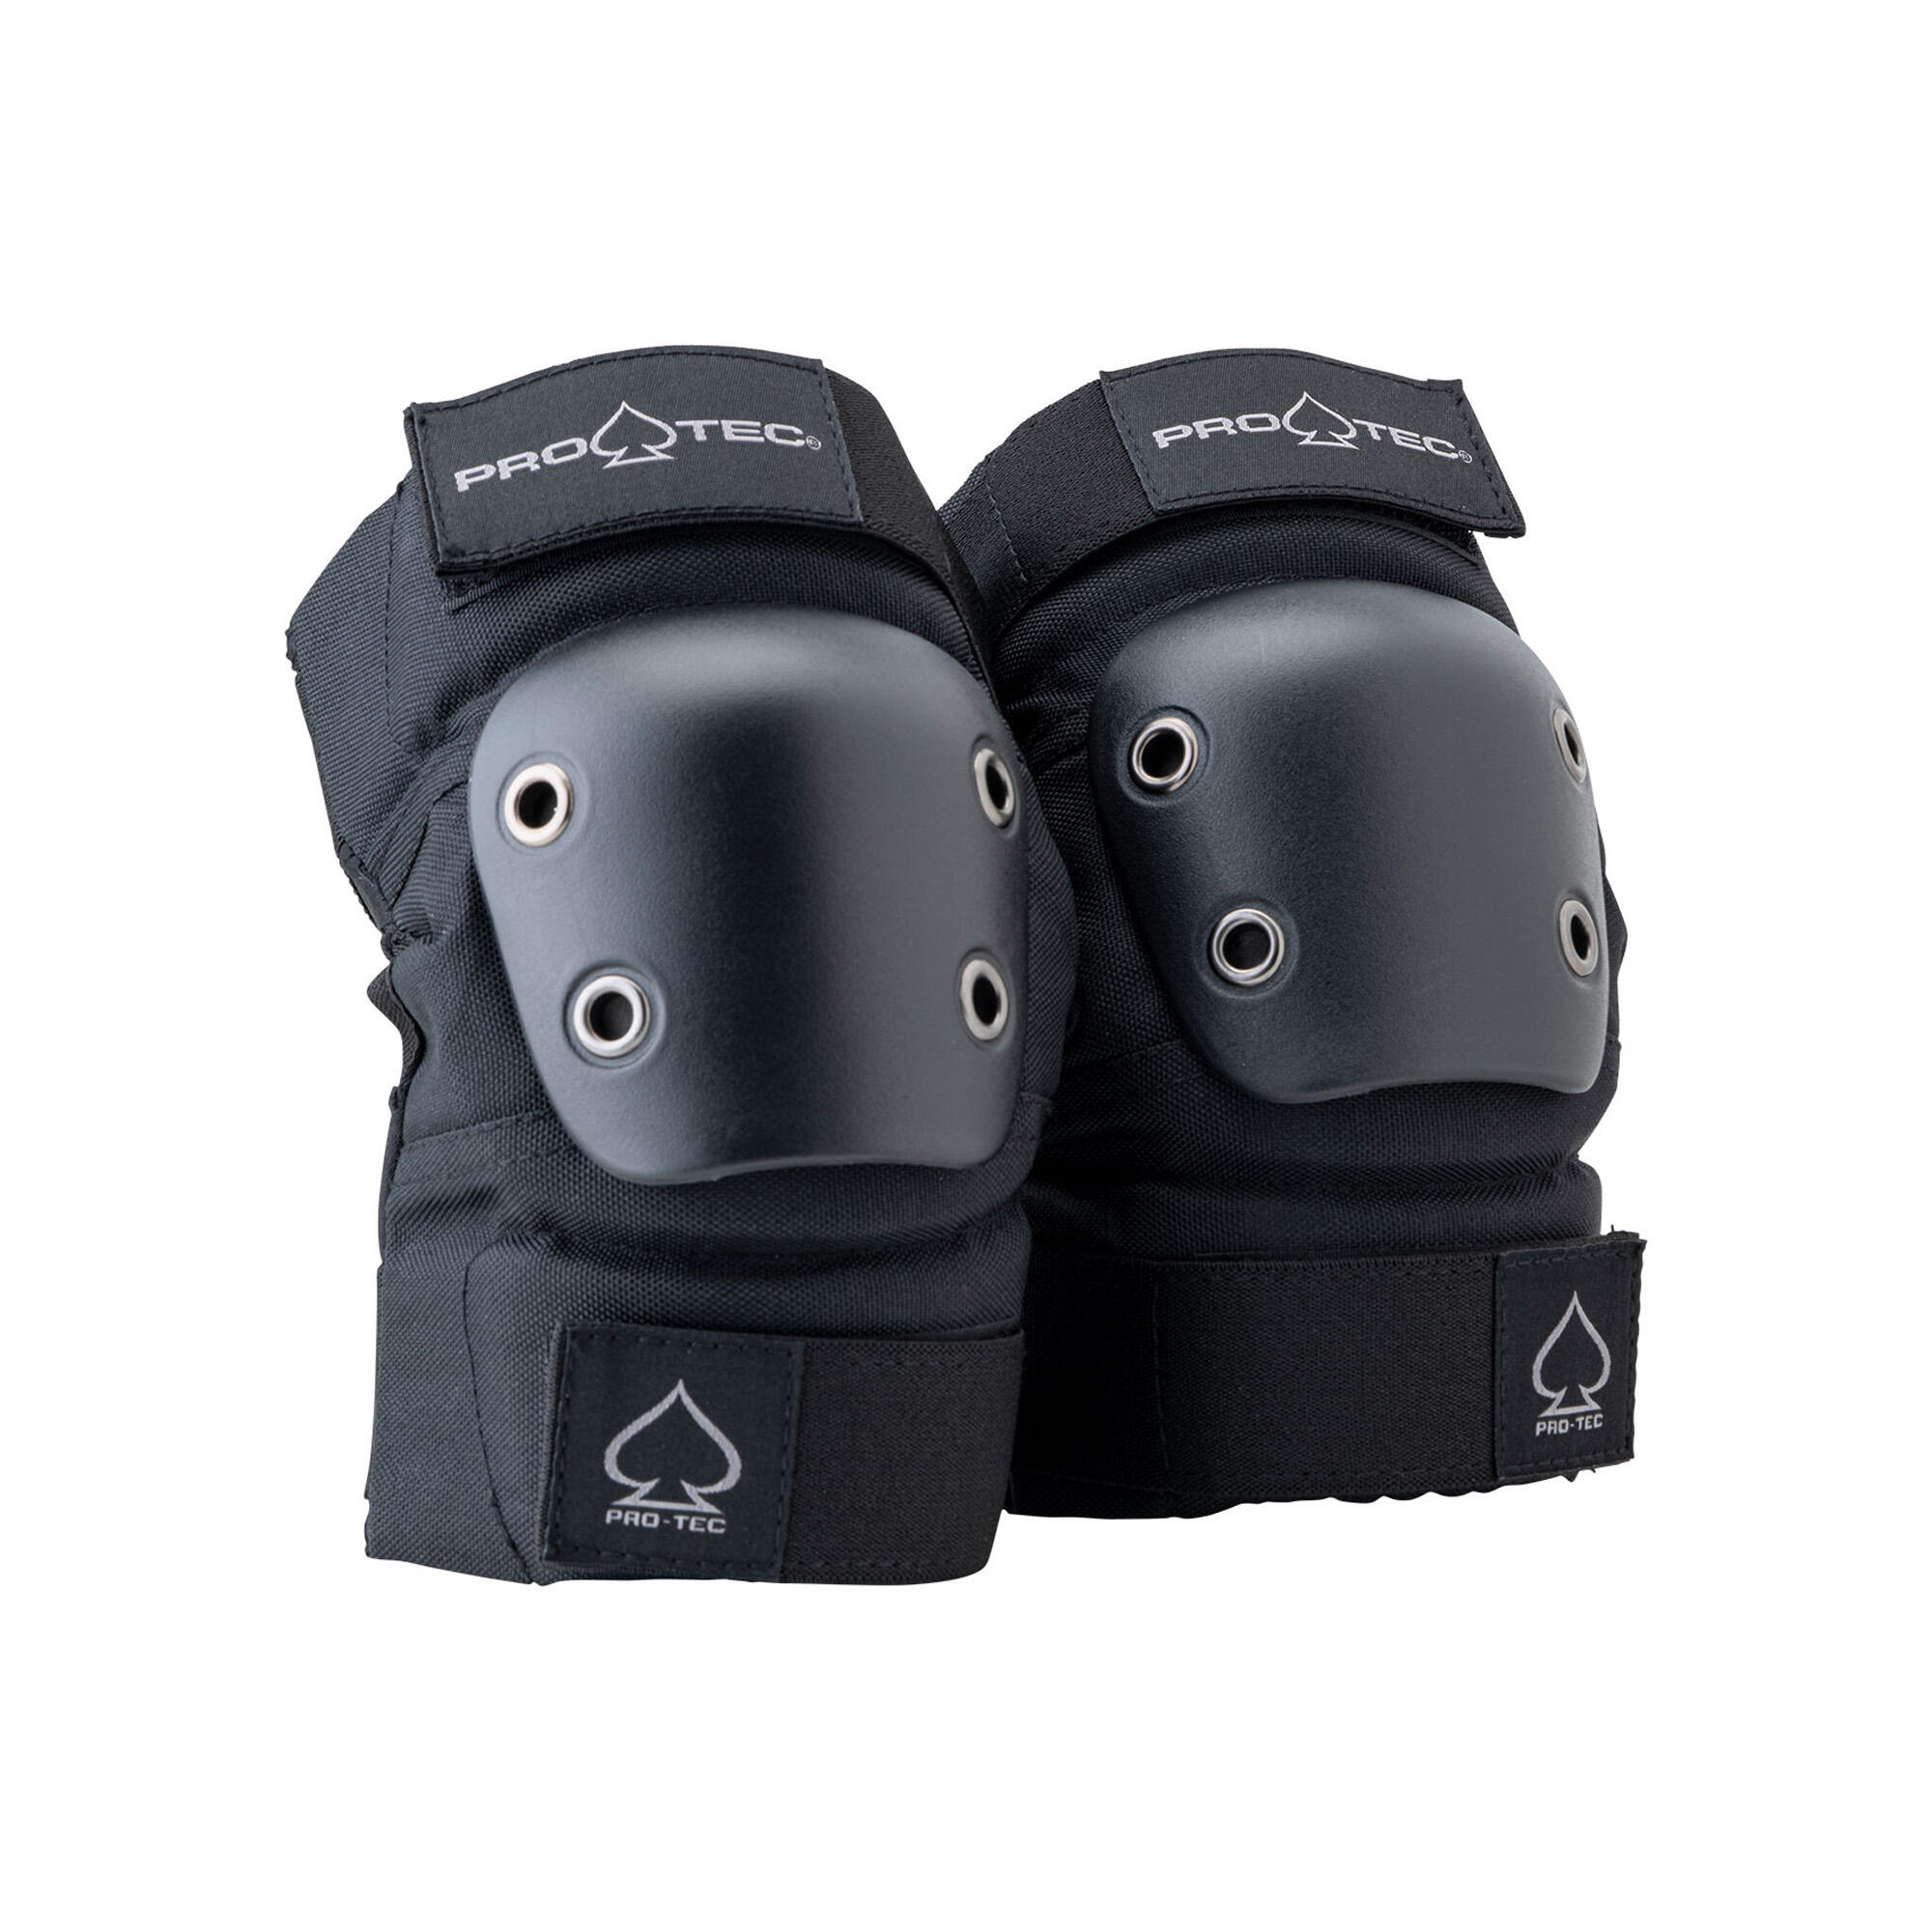 Adult Skateboarding Knee and Elbow Pads - Black 3/5